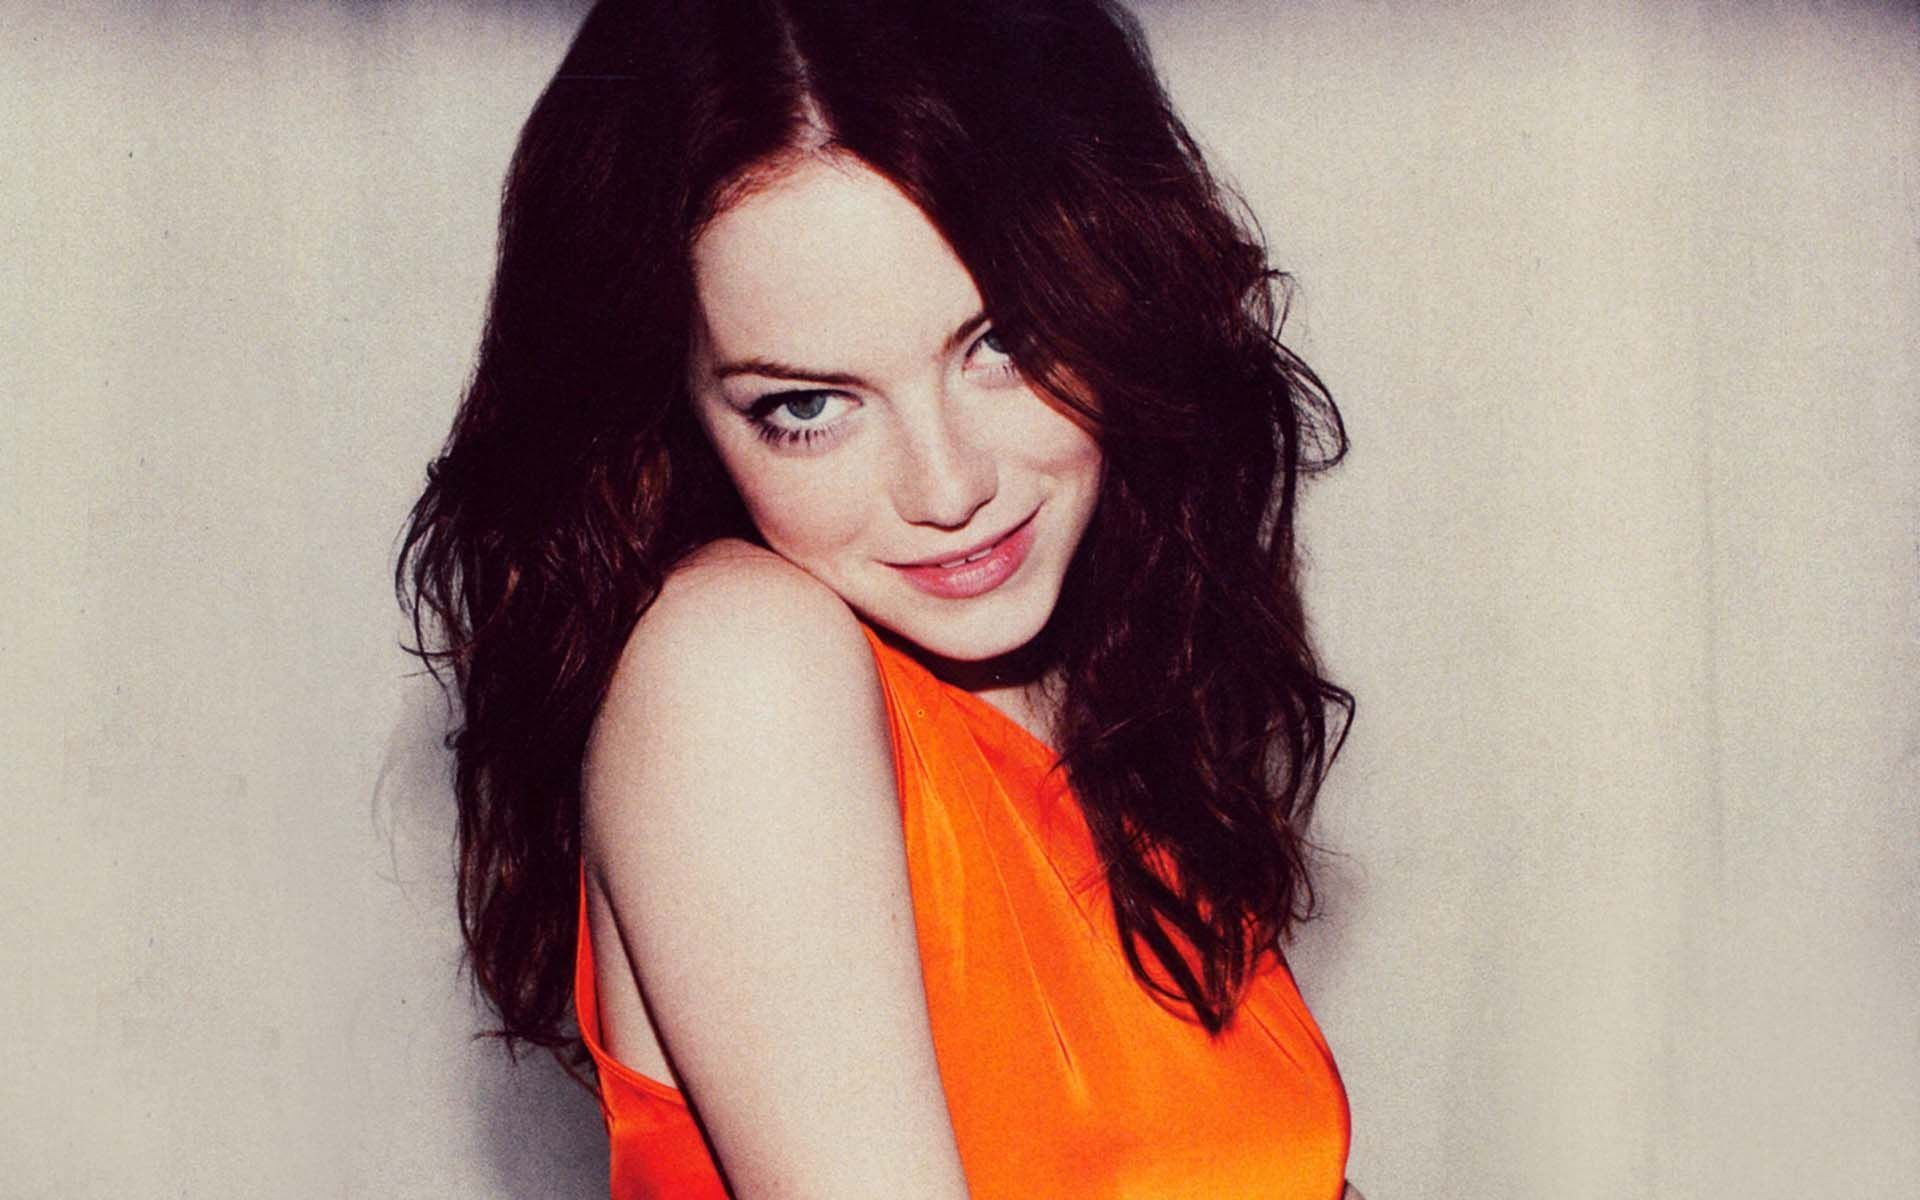 Emma Stone Hot wallpapers - Hot wallpapers of Emma Stone